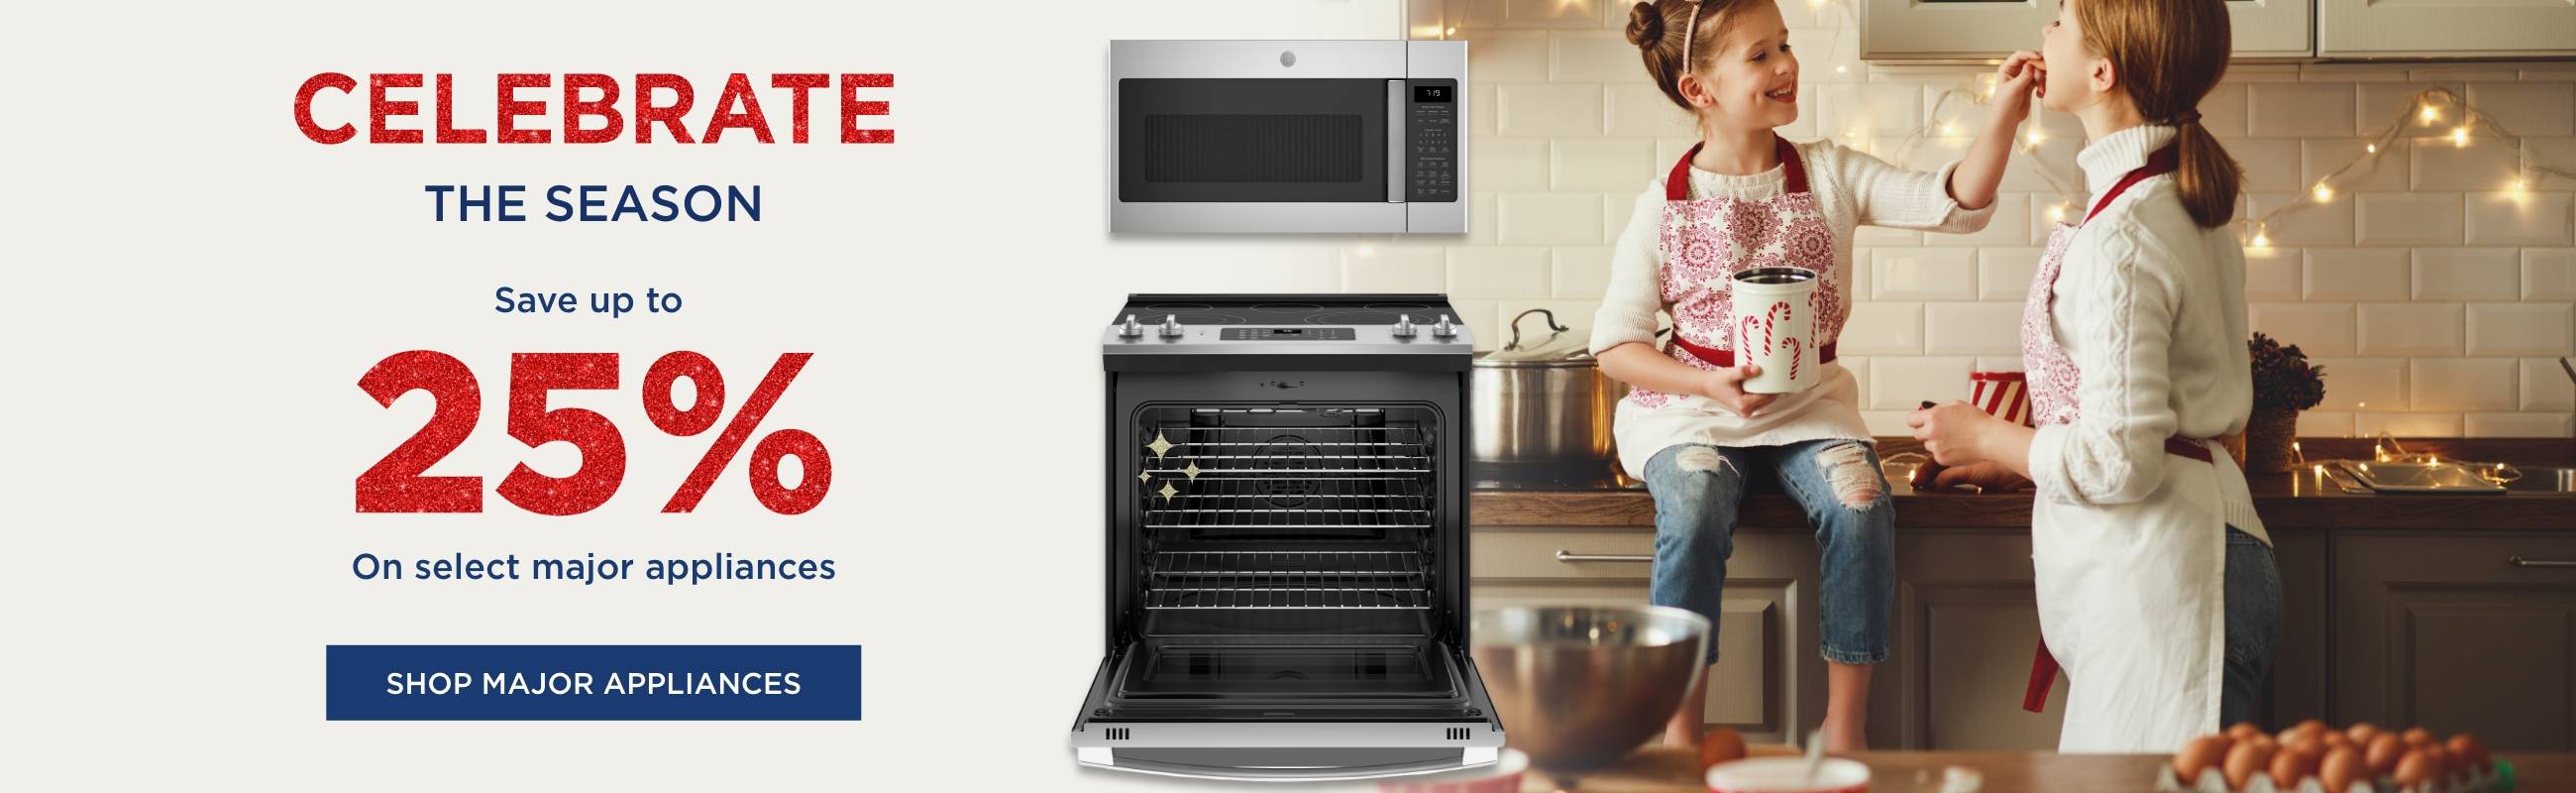 Celebrate the season - Save up to 25% on select major appliances